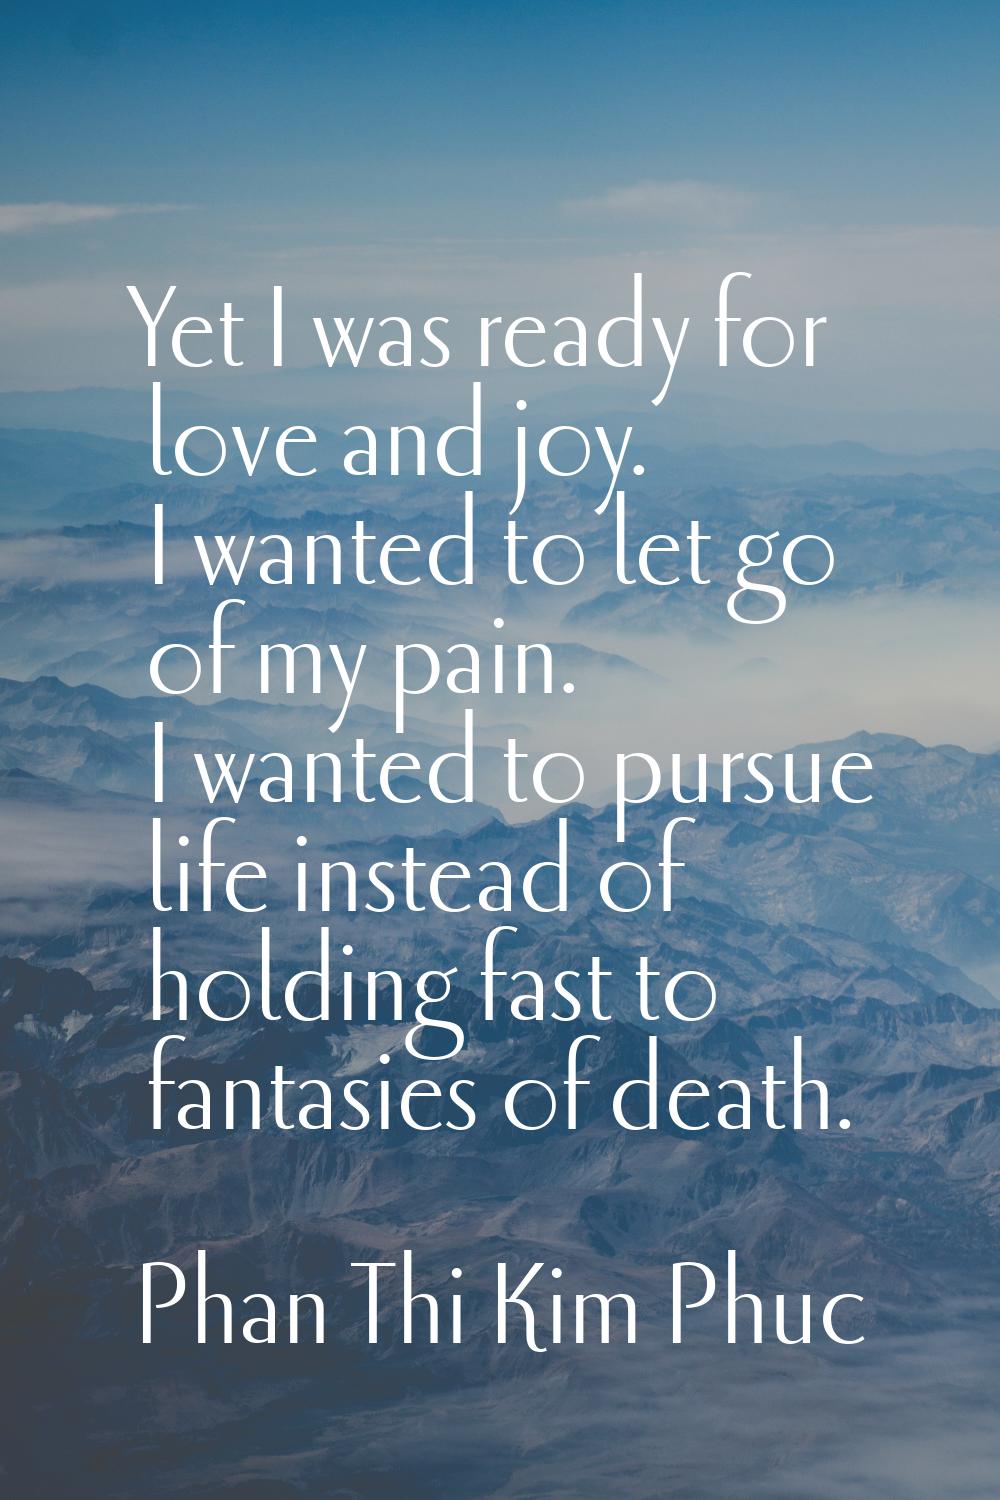 Yet I was ready for love and joy. I wanted to let go of my pain. I wanted to pursue life instead of